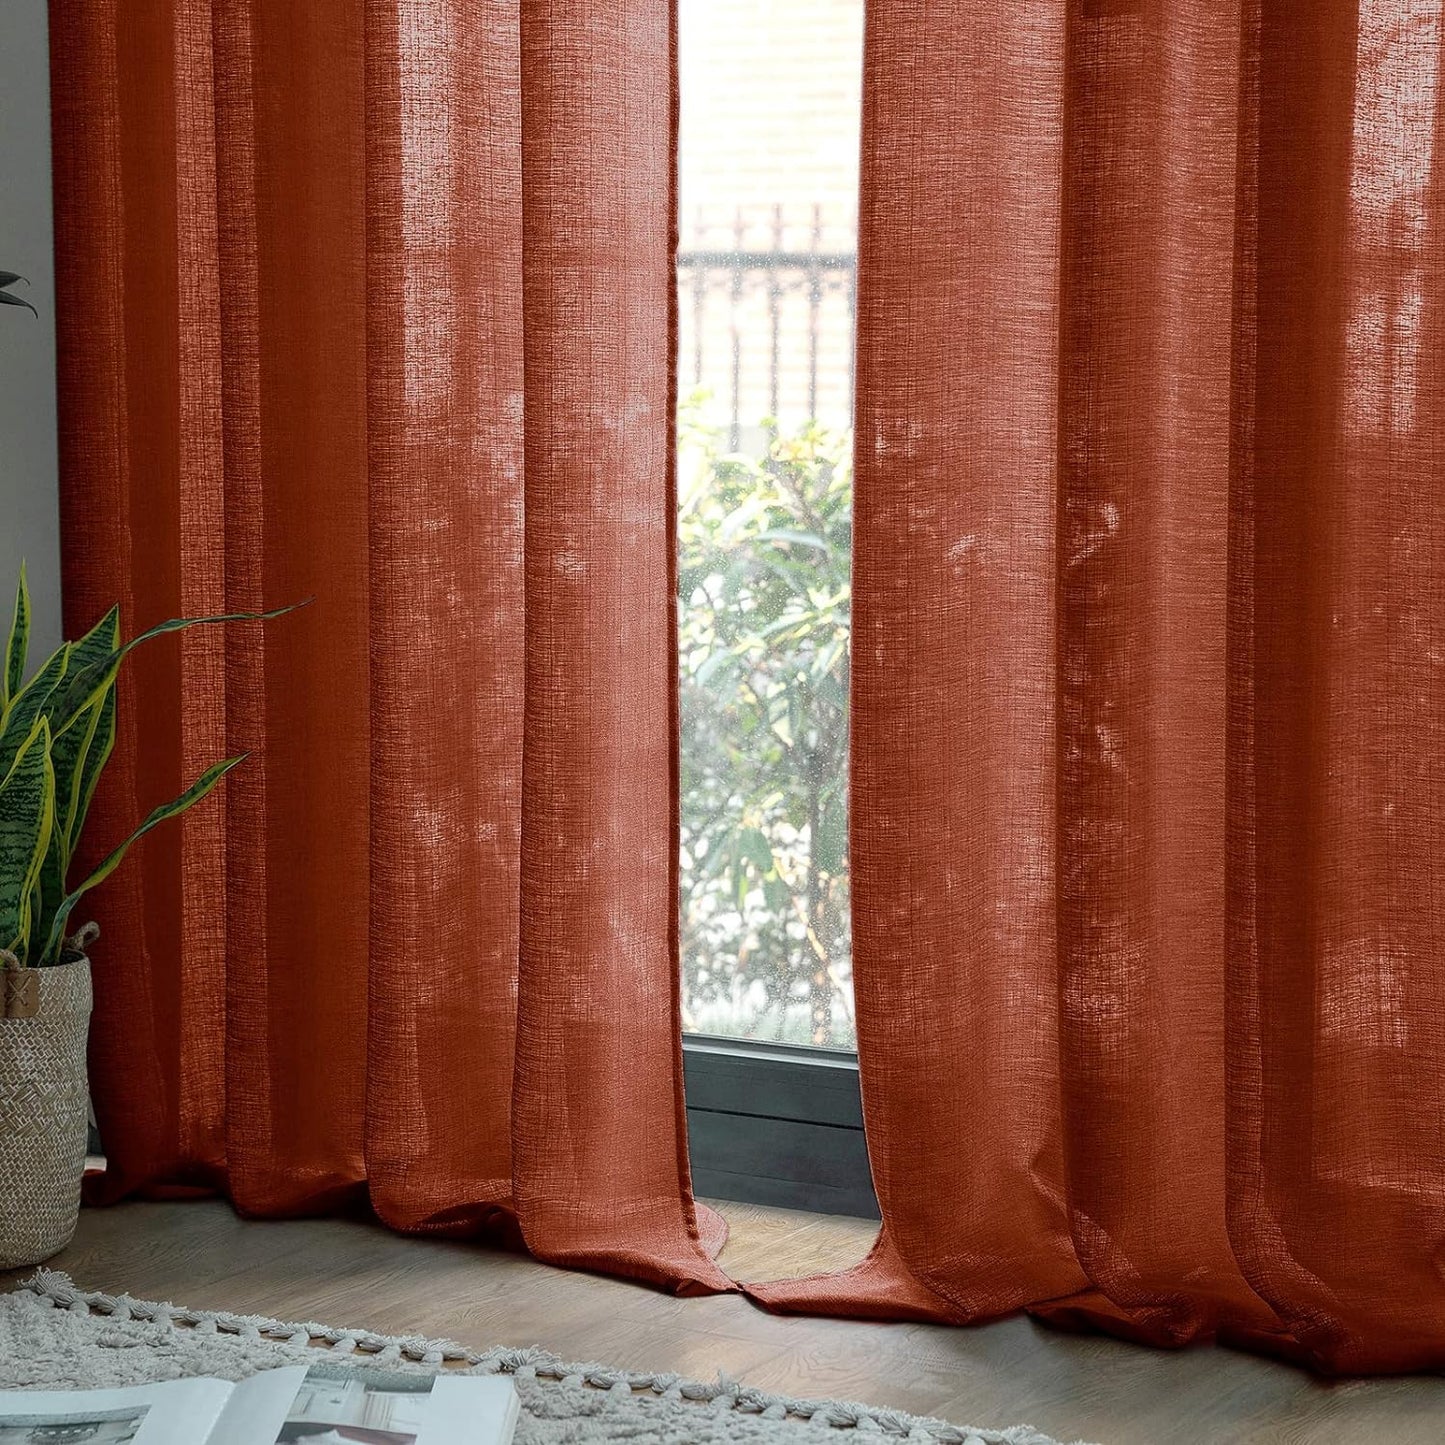 MIULEE Burnt Orange Linen Semi Sheer Curtains 2 Panels for Living Room Bedroom Linen Textured Light Filtering Privacy Window Curtains Terracotta Grommet Drapes Rust Boho Fall Decor W 52 X L 84 Inches  MIULEE   